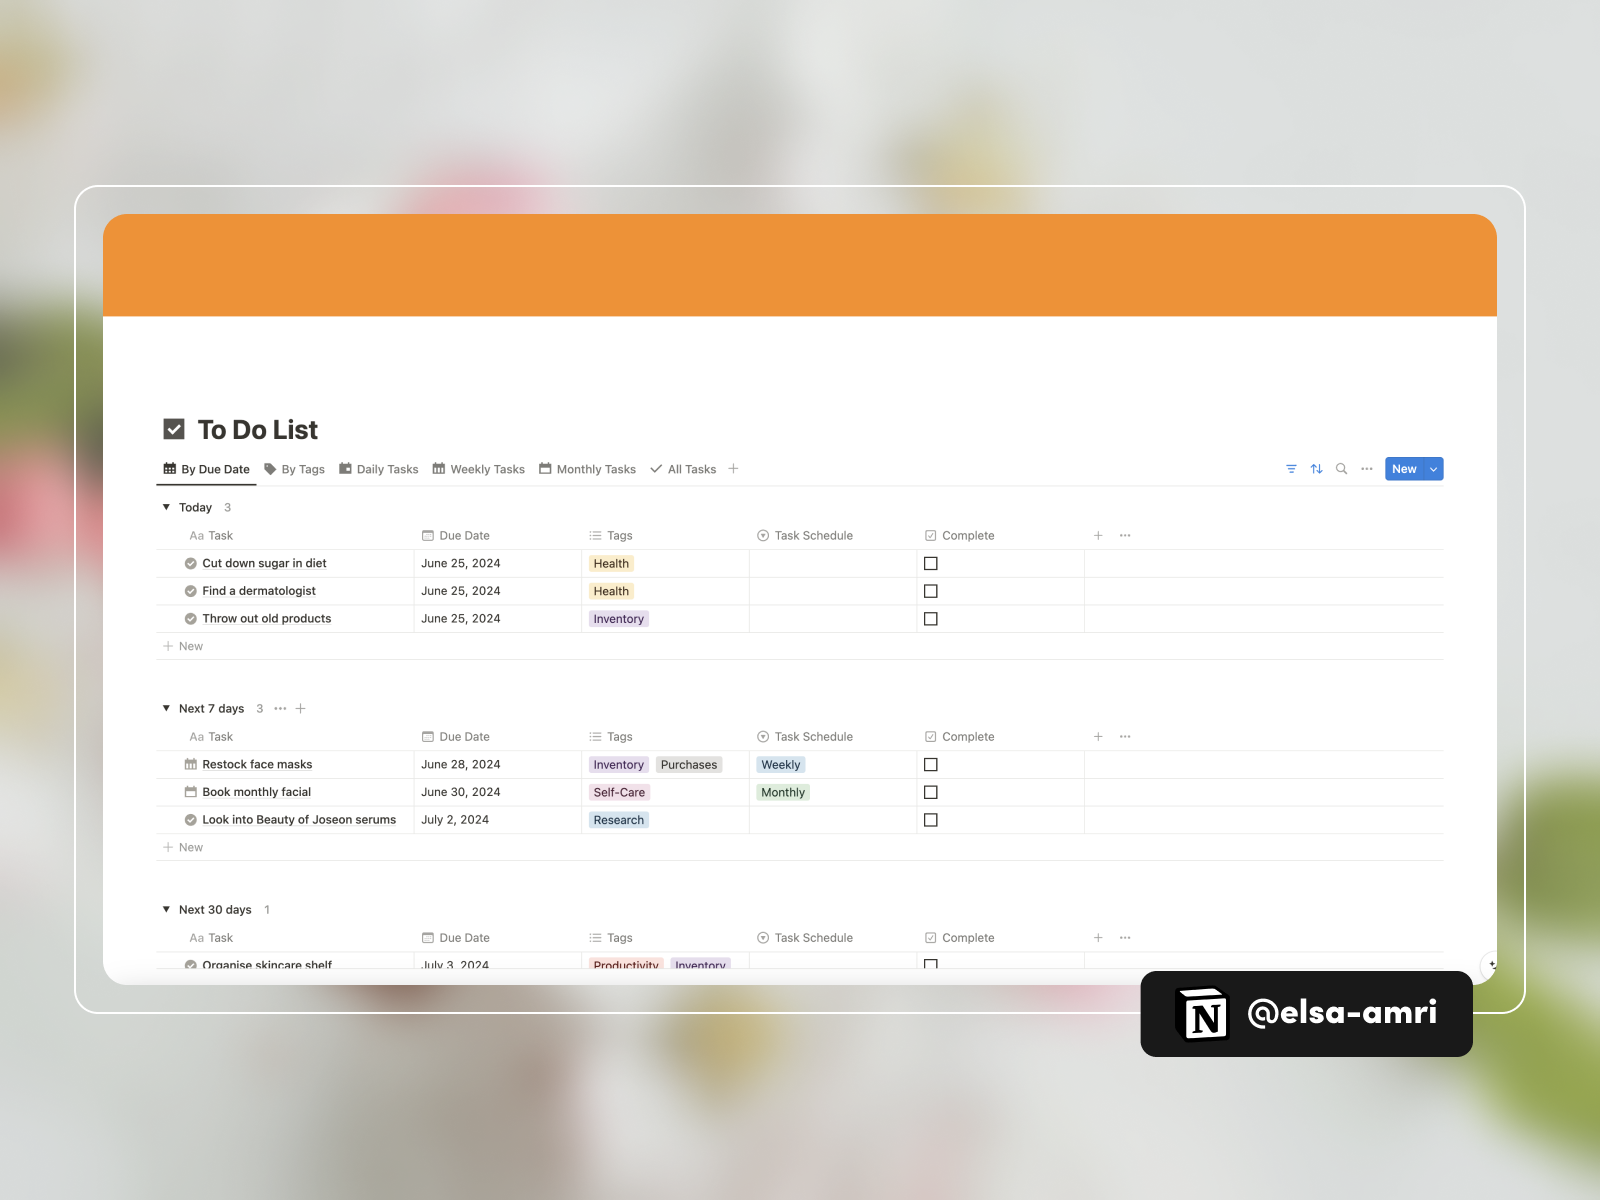 Manage your skincare with the Personal Care Template! ✨💖 Track past and current products, maintain your morning and evening routines, journal your skin's progress, and monitor your spending. Stay organized and financially savvy while optimizing your skincare routine.